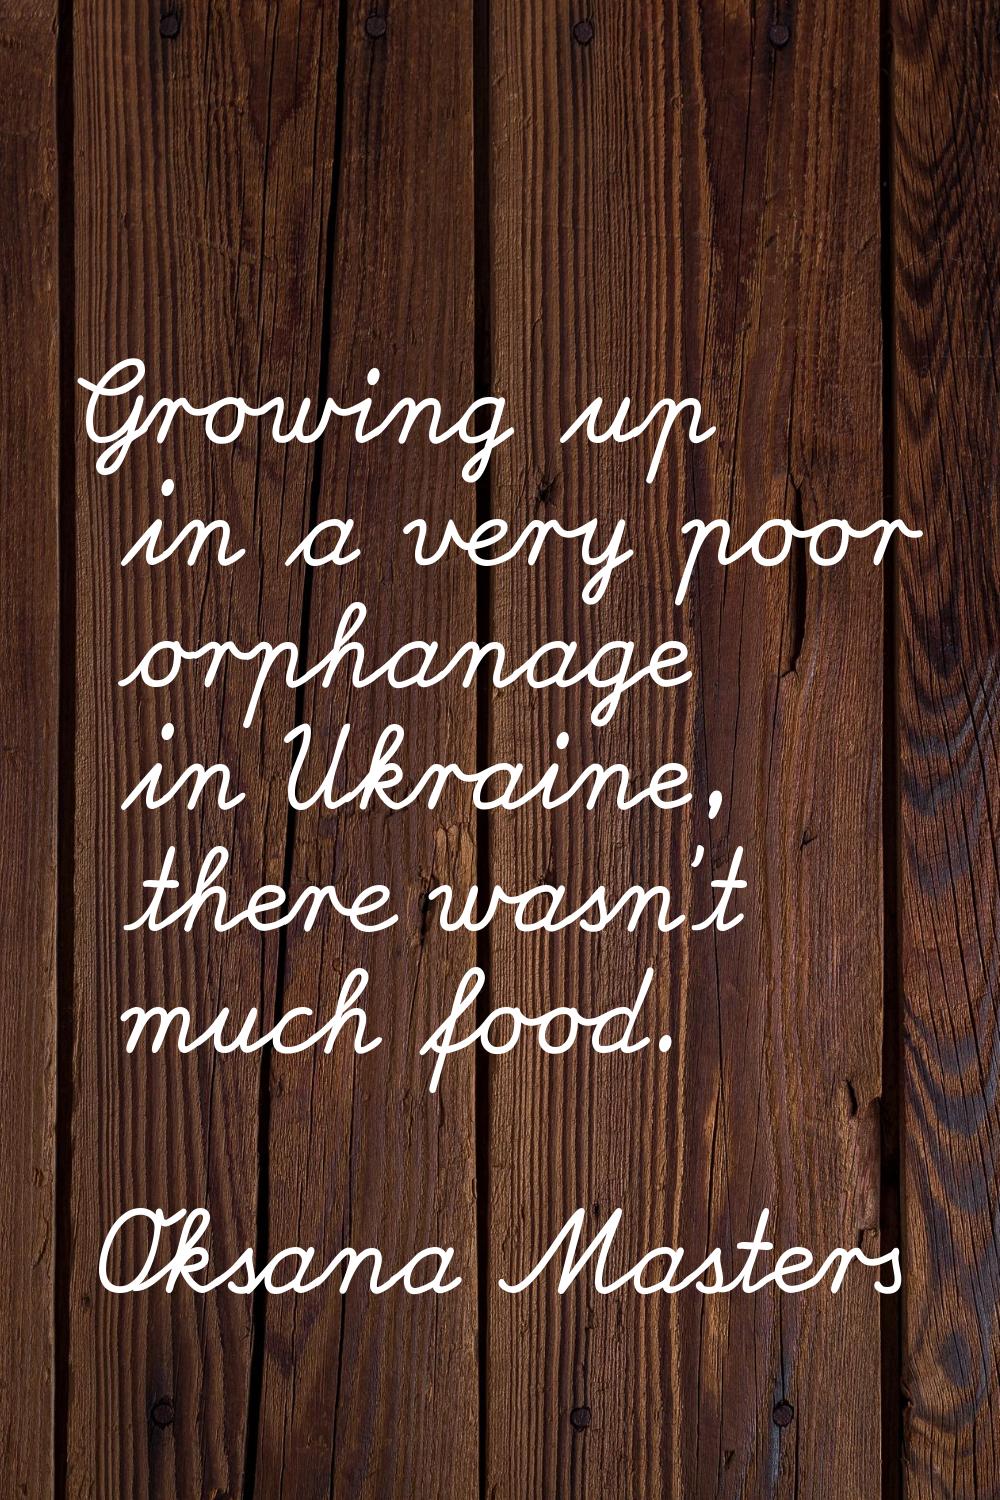 Growing up in a very poor orphanage in Ukraine, there wasn't much food.